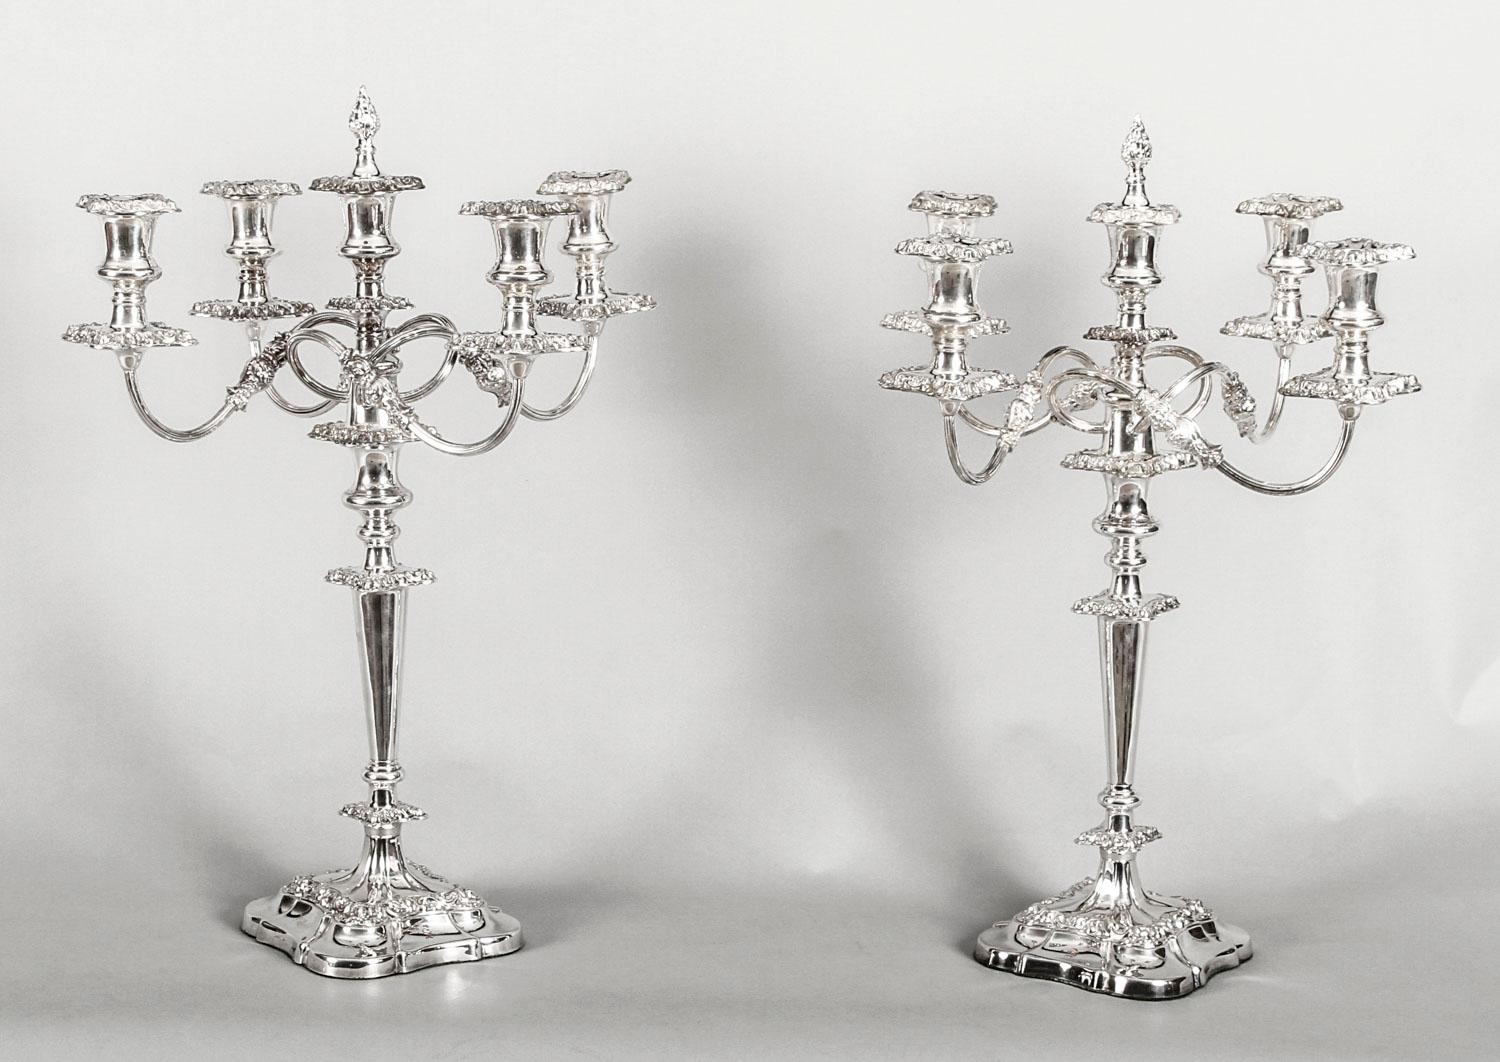 Antique Pair of Five-Light Candelabra by Mappin & Webb, 19th Century 11